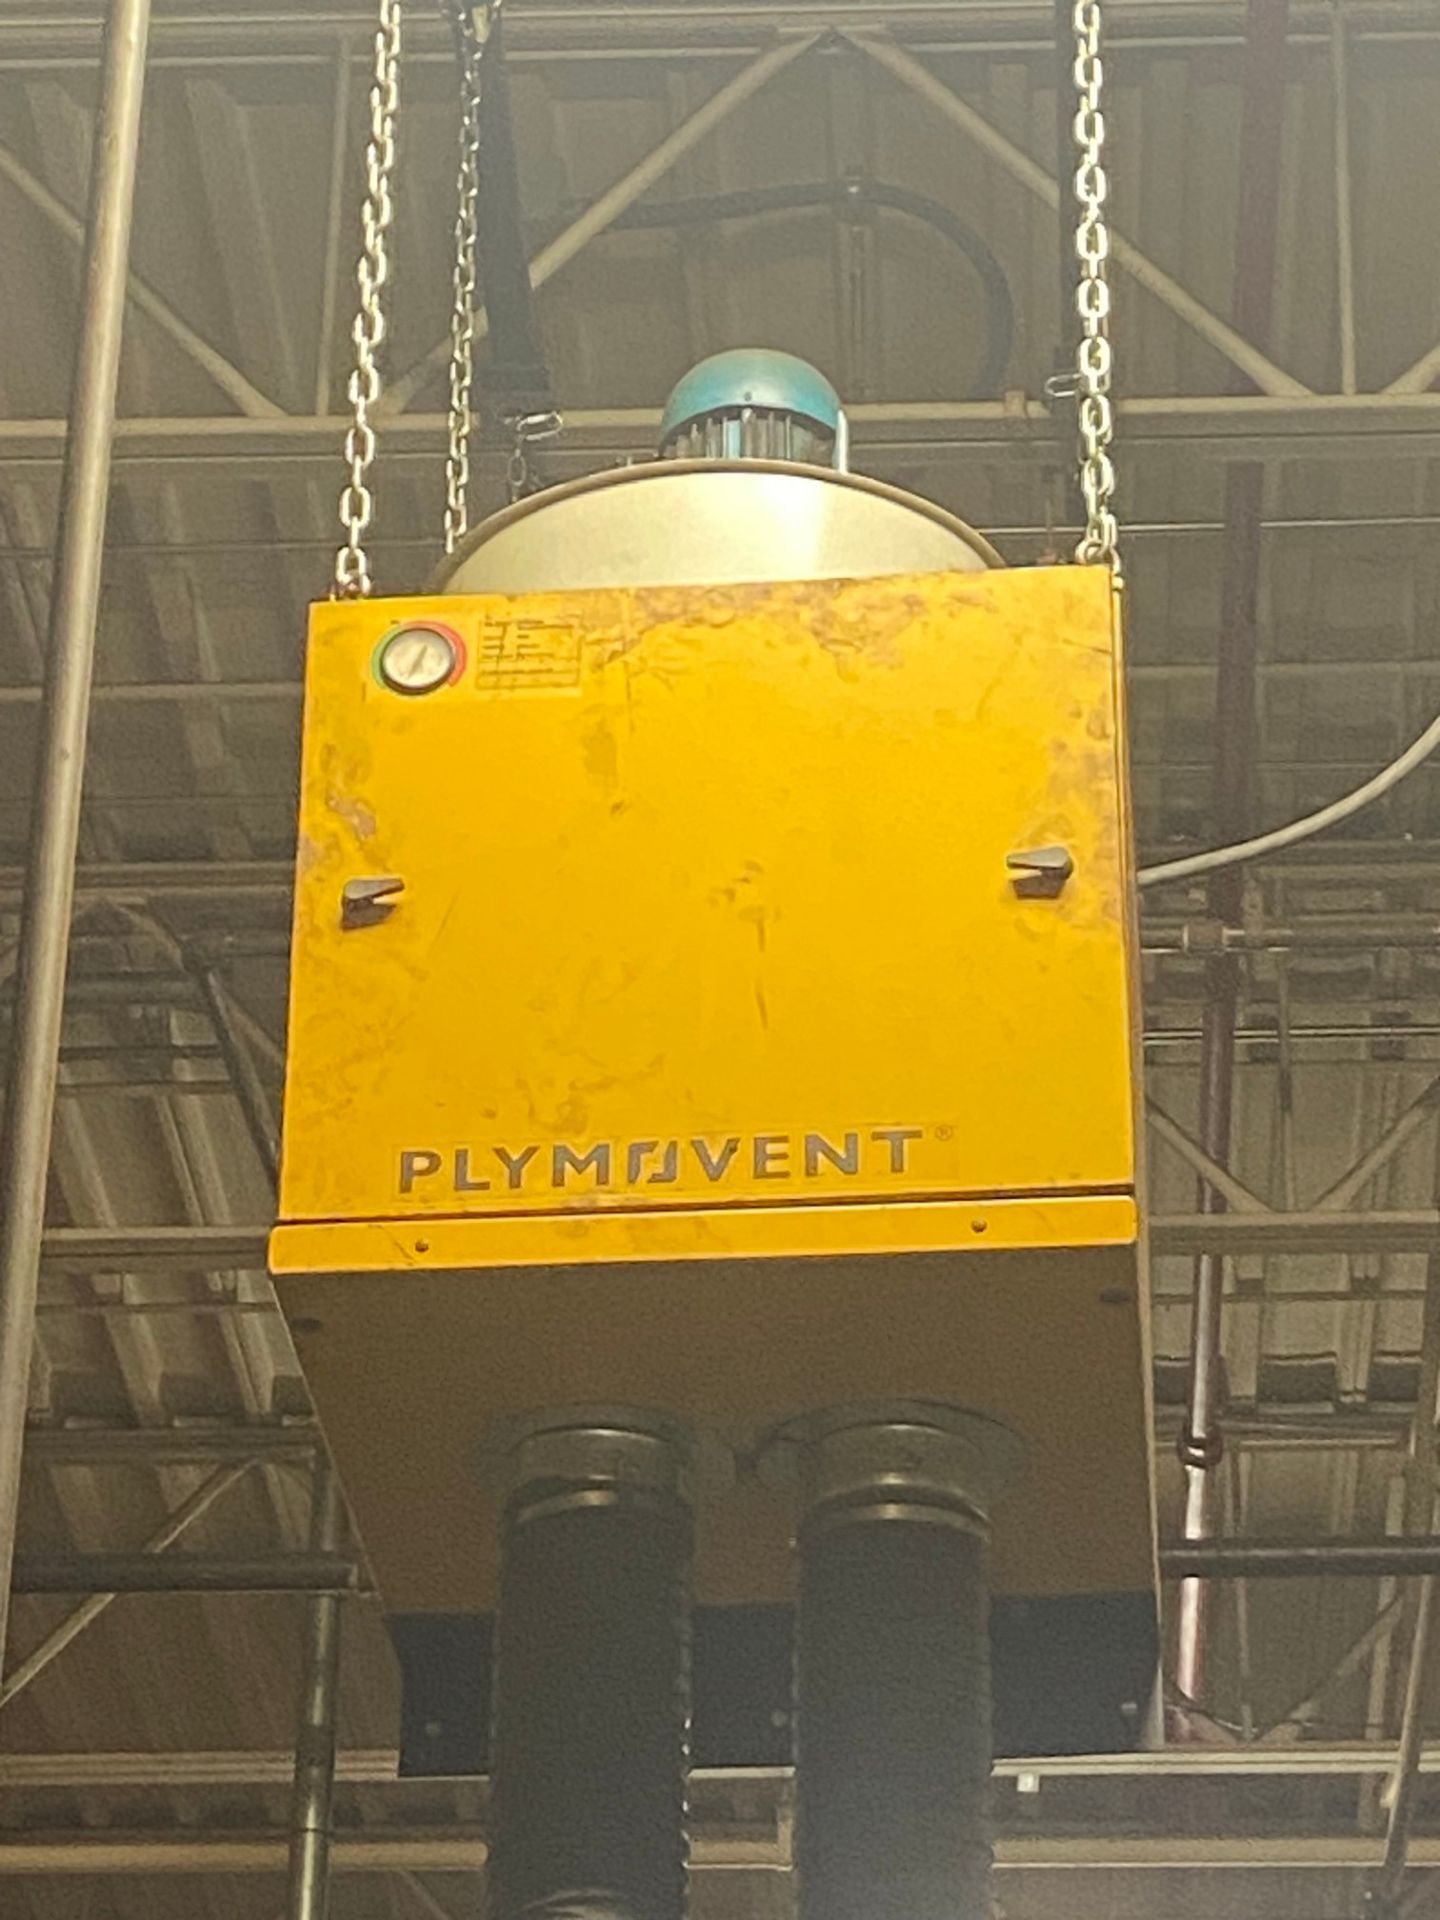 CUSTOM BUILT WELDING CELL C/W PLYMOVENT FUME EXTRACTOR UNIT (RIGGING FEE $180) - Image 10 of 10